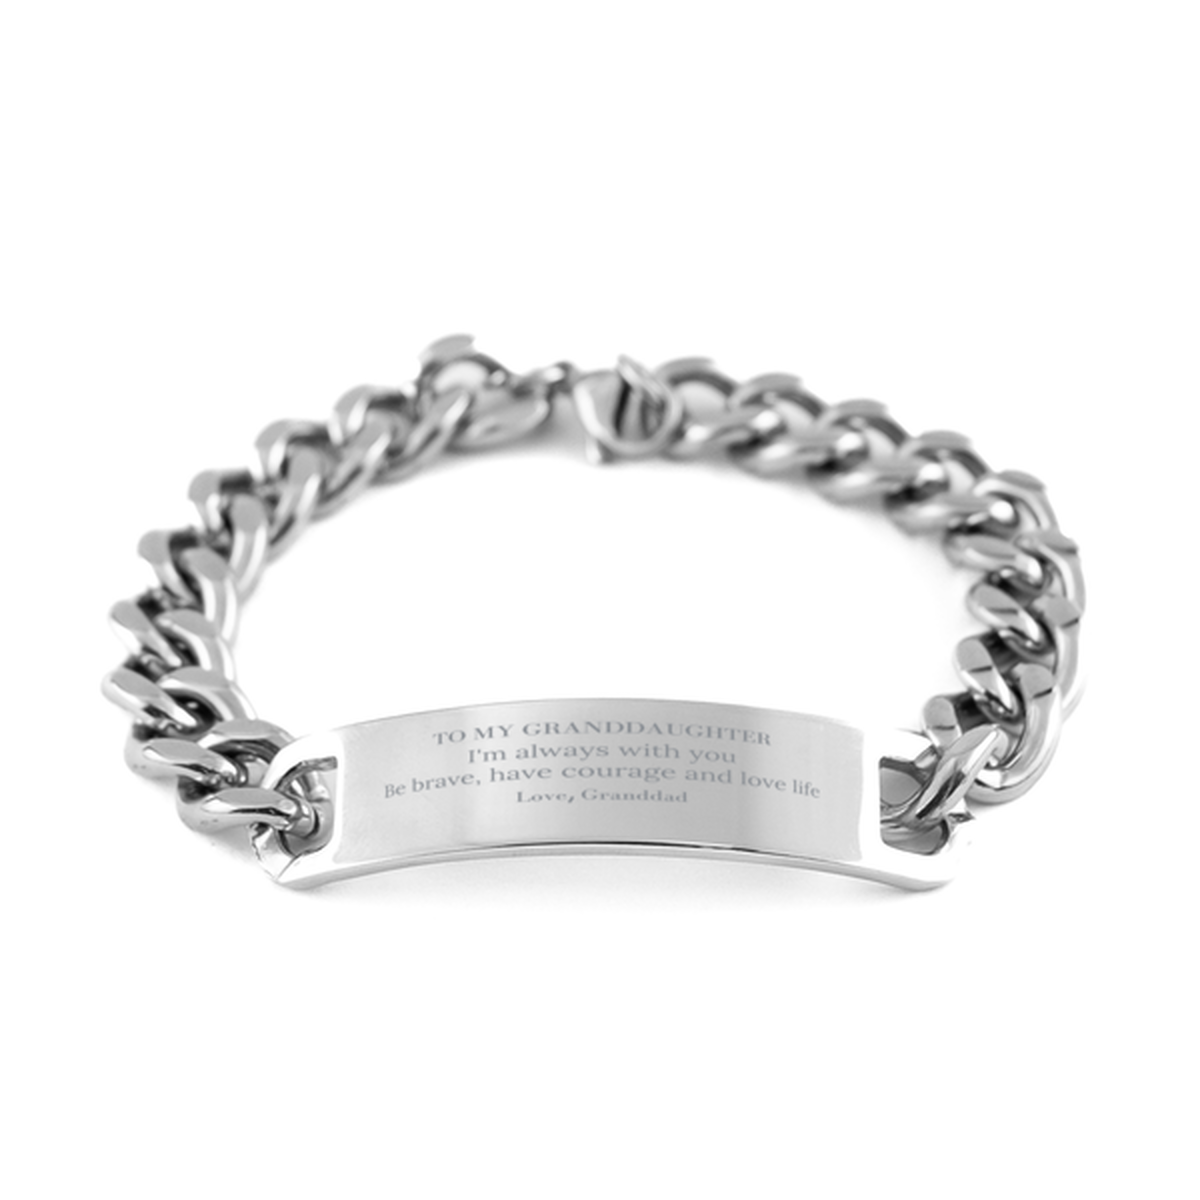 To My Granddaughter Gifts from Granddad, Unique Cuban Chain Stainless Steel Bracelet Inspirational Christmas Birthday Graduation Gifts for Granddaughter I'm always with you. Be brave, have courage and love life. Love, Granddad